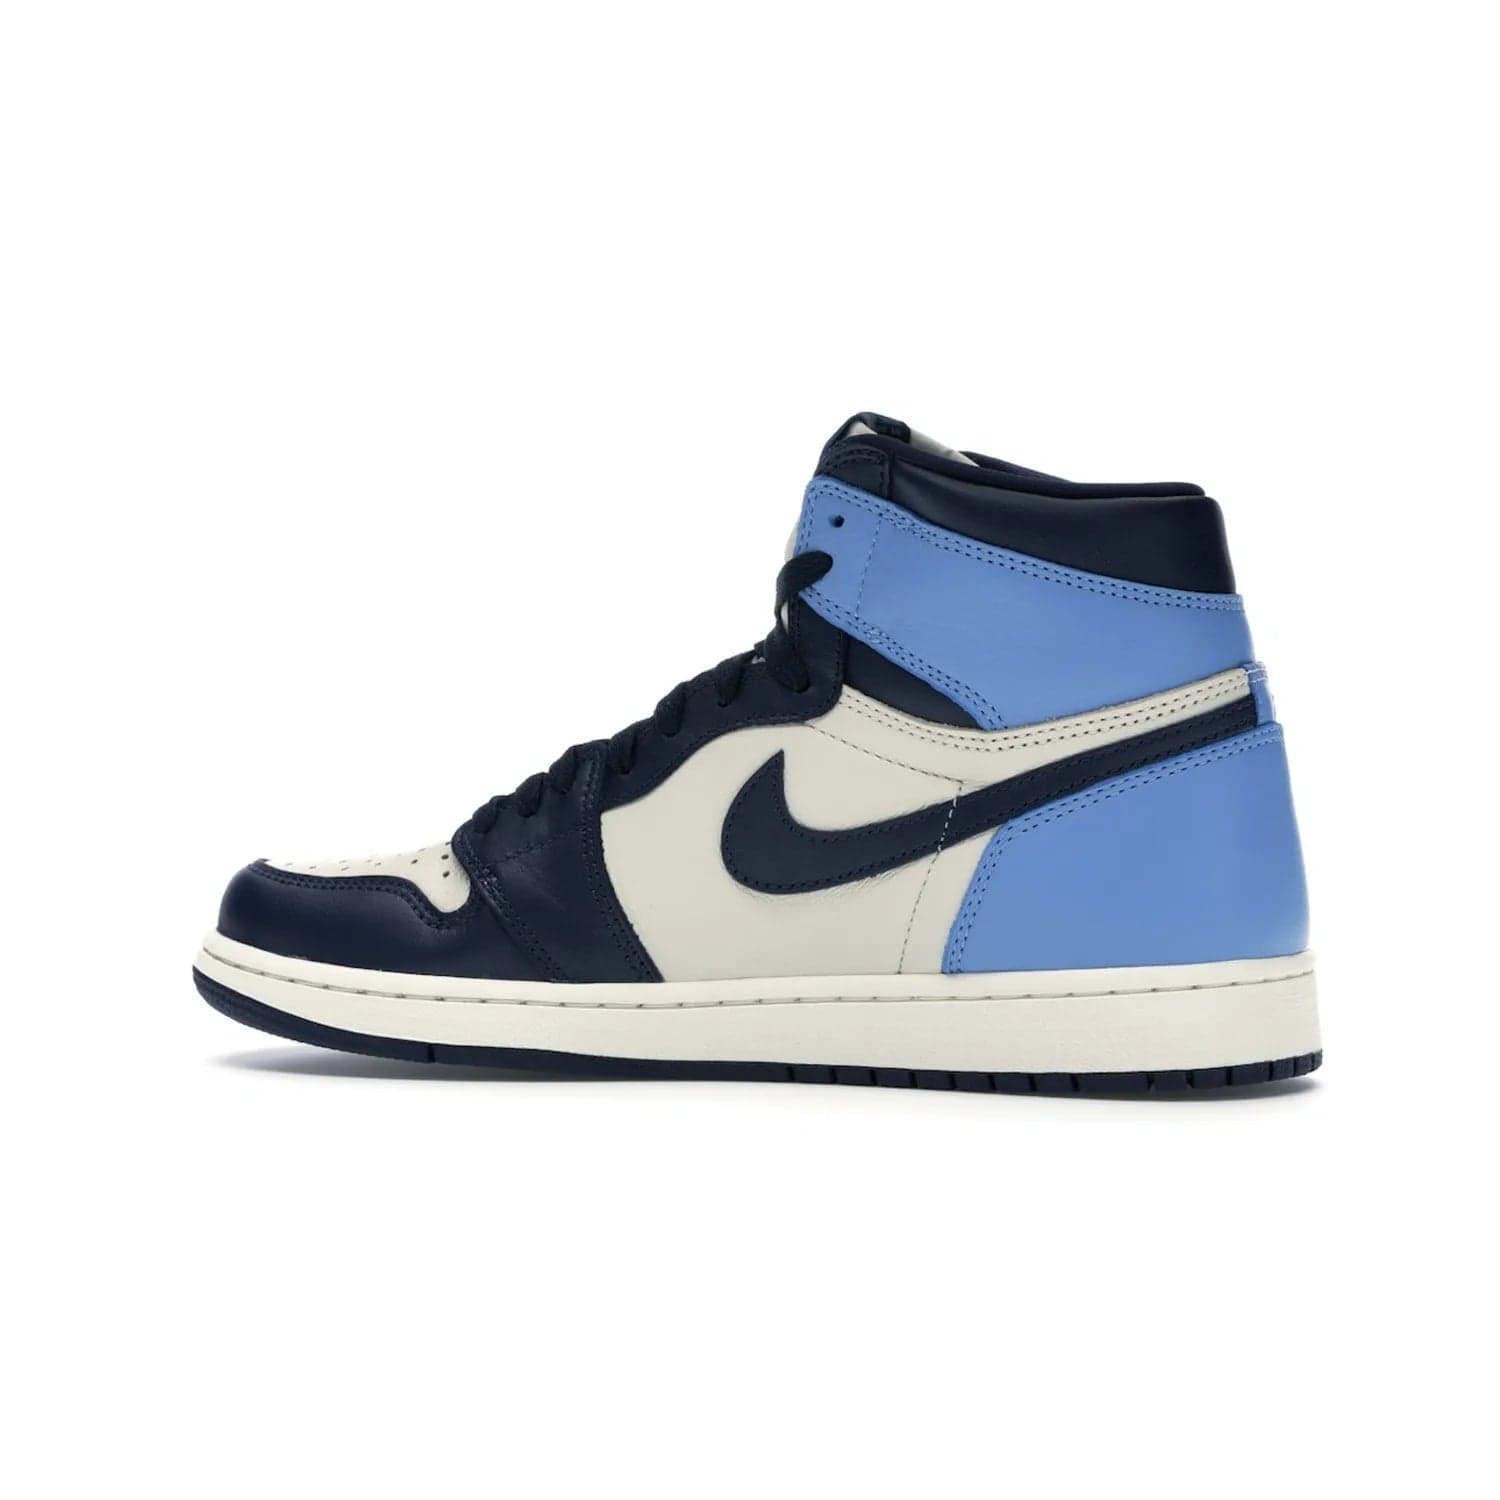 Jordan 1 Retro High Obsidian UNC - Image 21 - Only at www.BallersClubKickz.com - Bring a timeless classic to your wardrobe with the Air Jordan 1 Retro High "Obsidian/University Blue”. A full leather upper combines Obsidian and University Blue detailing for a retro Jordan style. Stitched Jumpman logo pays tribute to UNC. Experience classic style with a timeless sneaker.